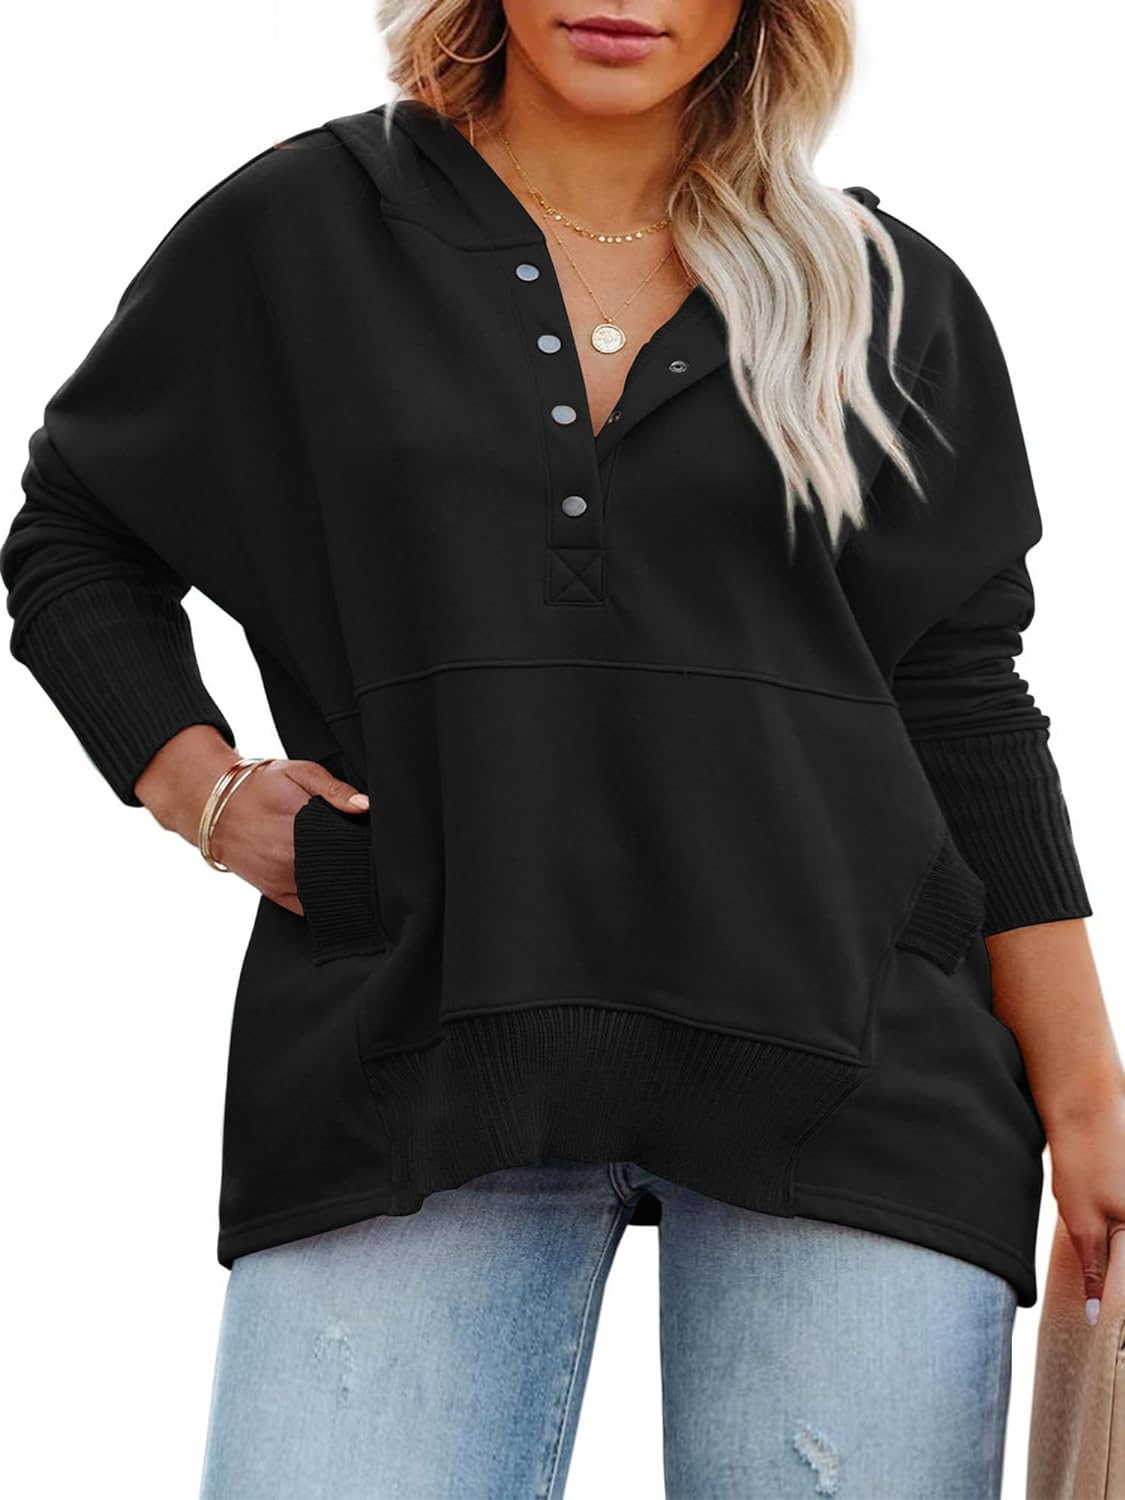 HDLTE Plus Size Faith Shirts Women Long Sleeve Graphic Tops Tees Christian Sweatshirts: A Review